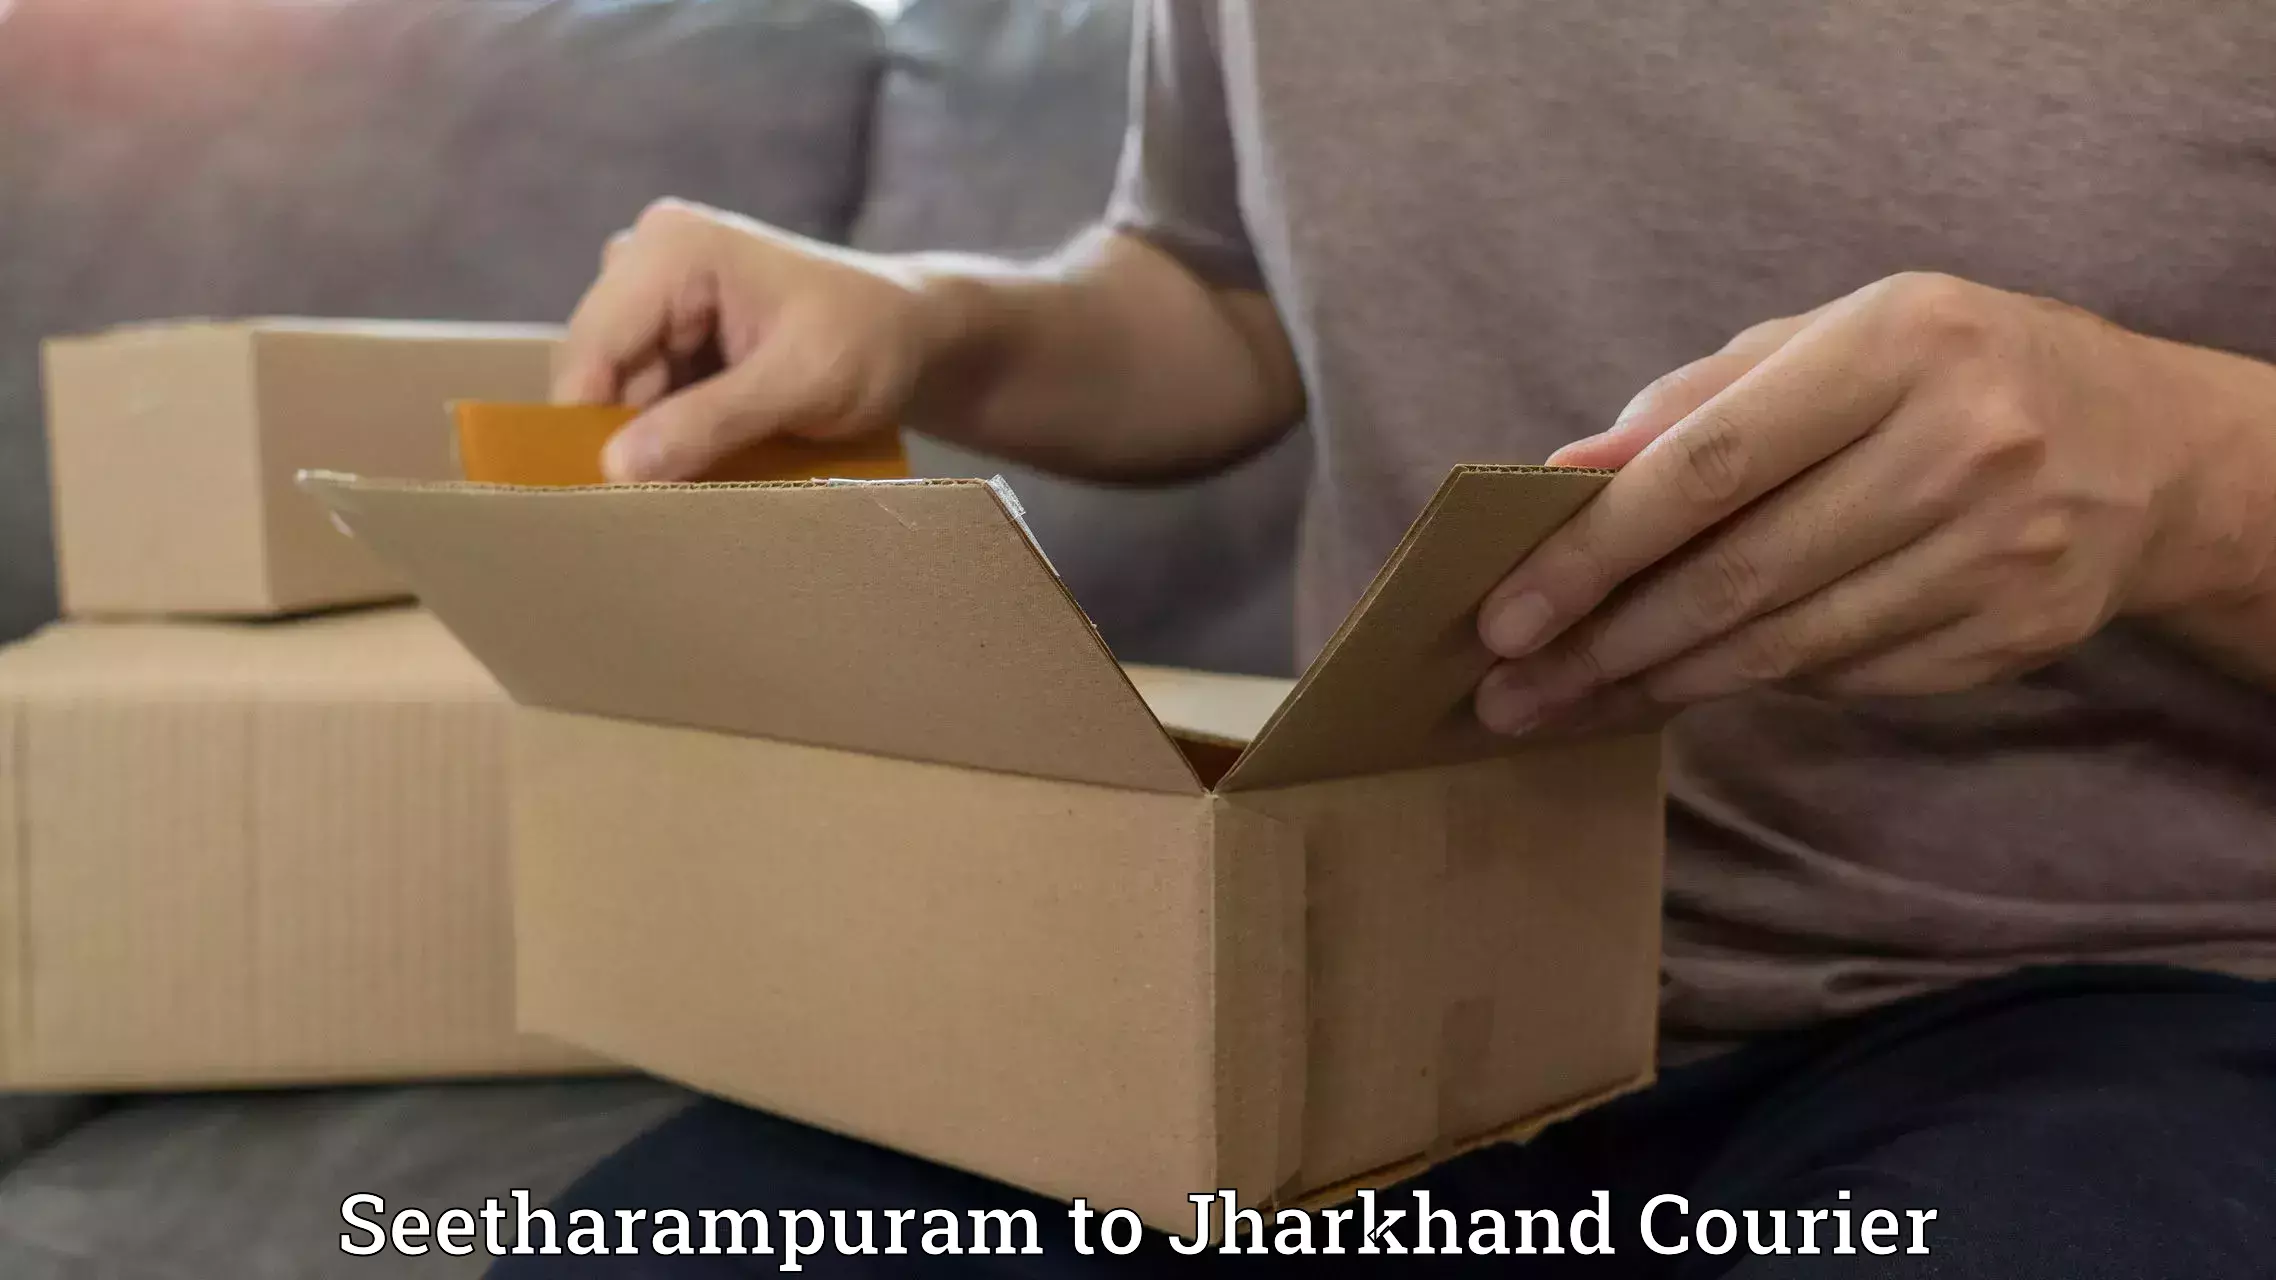 Express delivery capabilities in Seetharampuram to Dhanbad